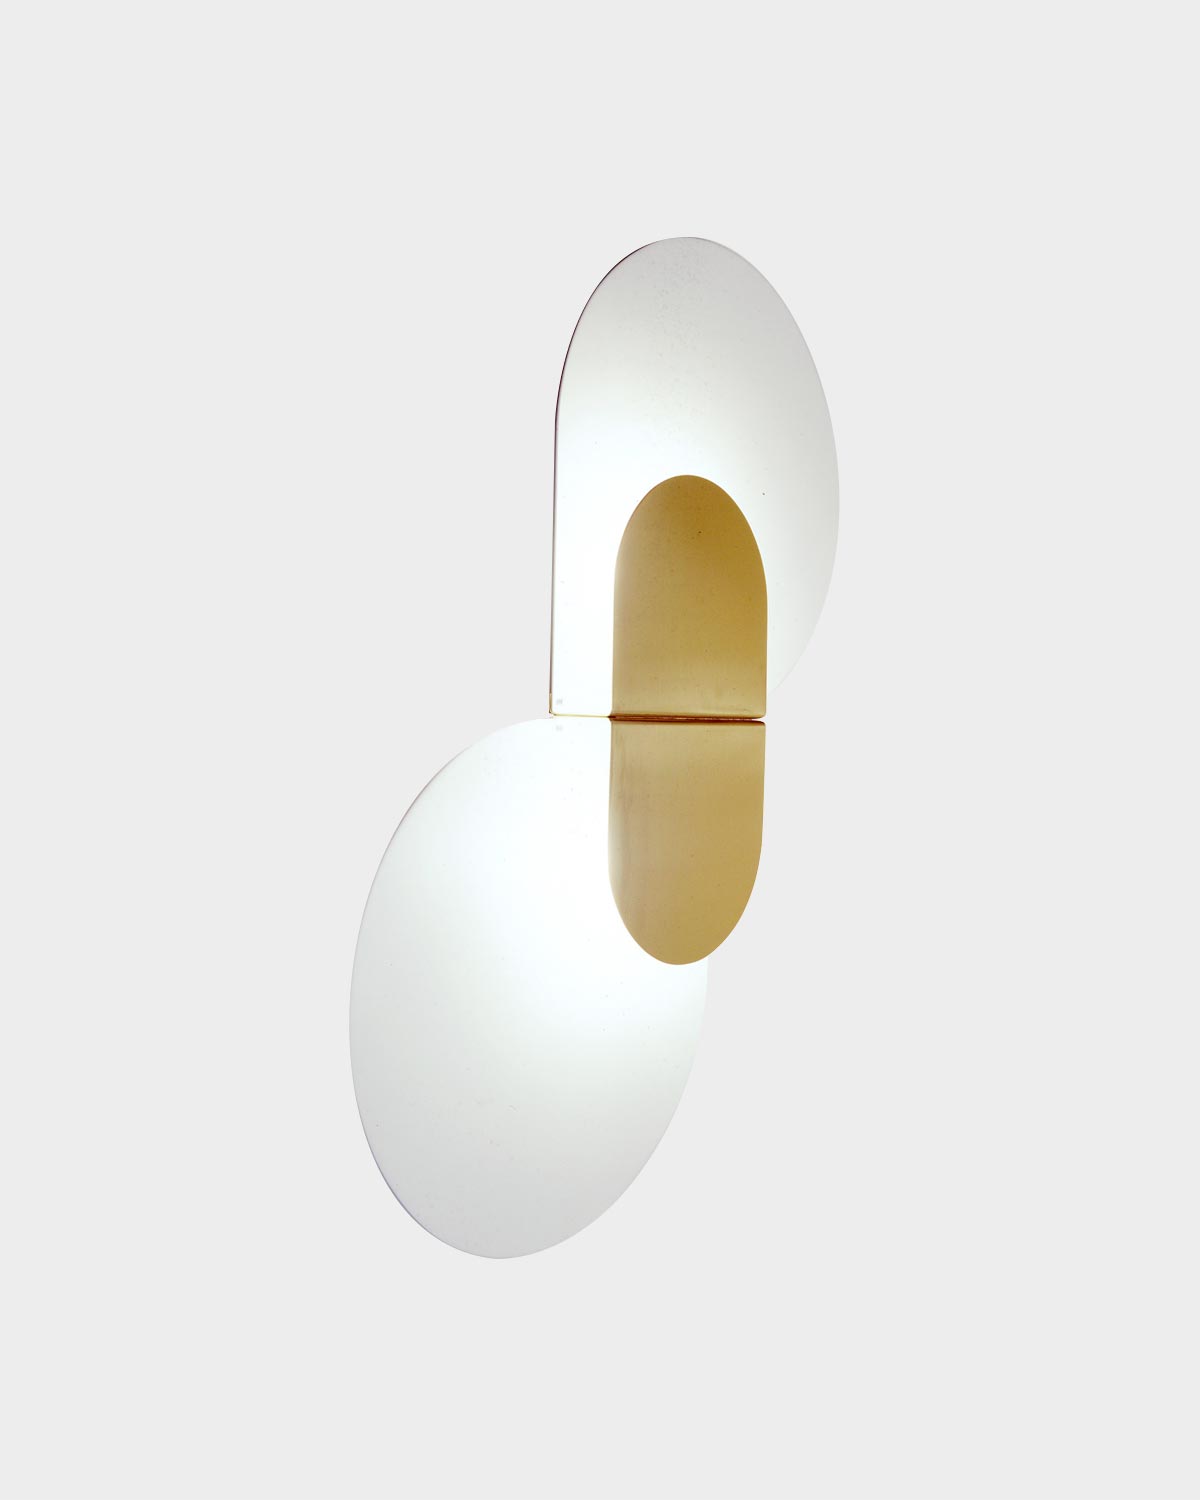 Large Scaled Wall Sconce by Pia Guidetti for Lumi, model 1323/PL/2